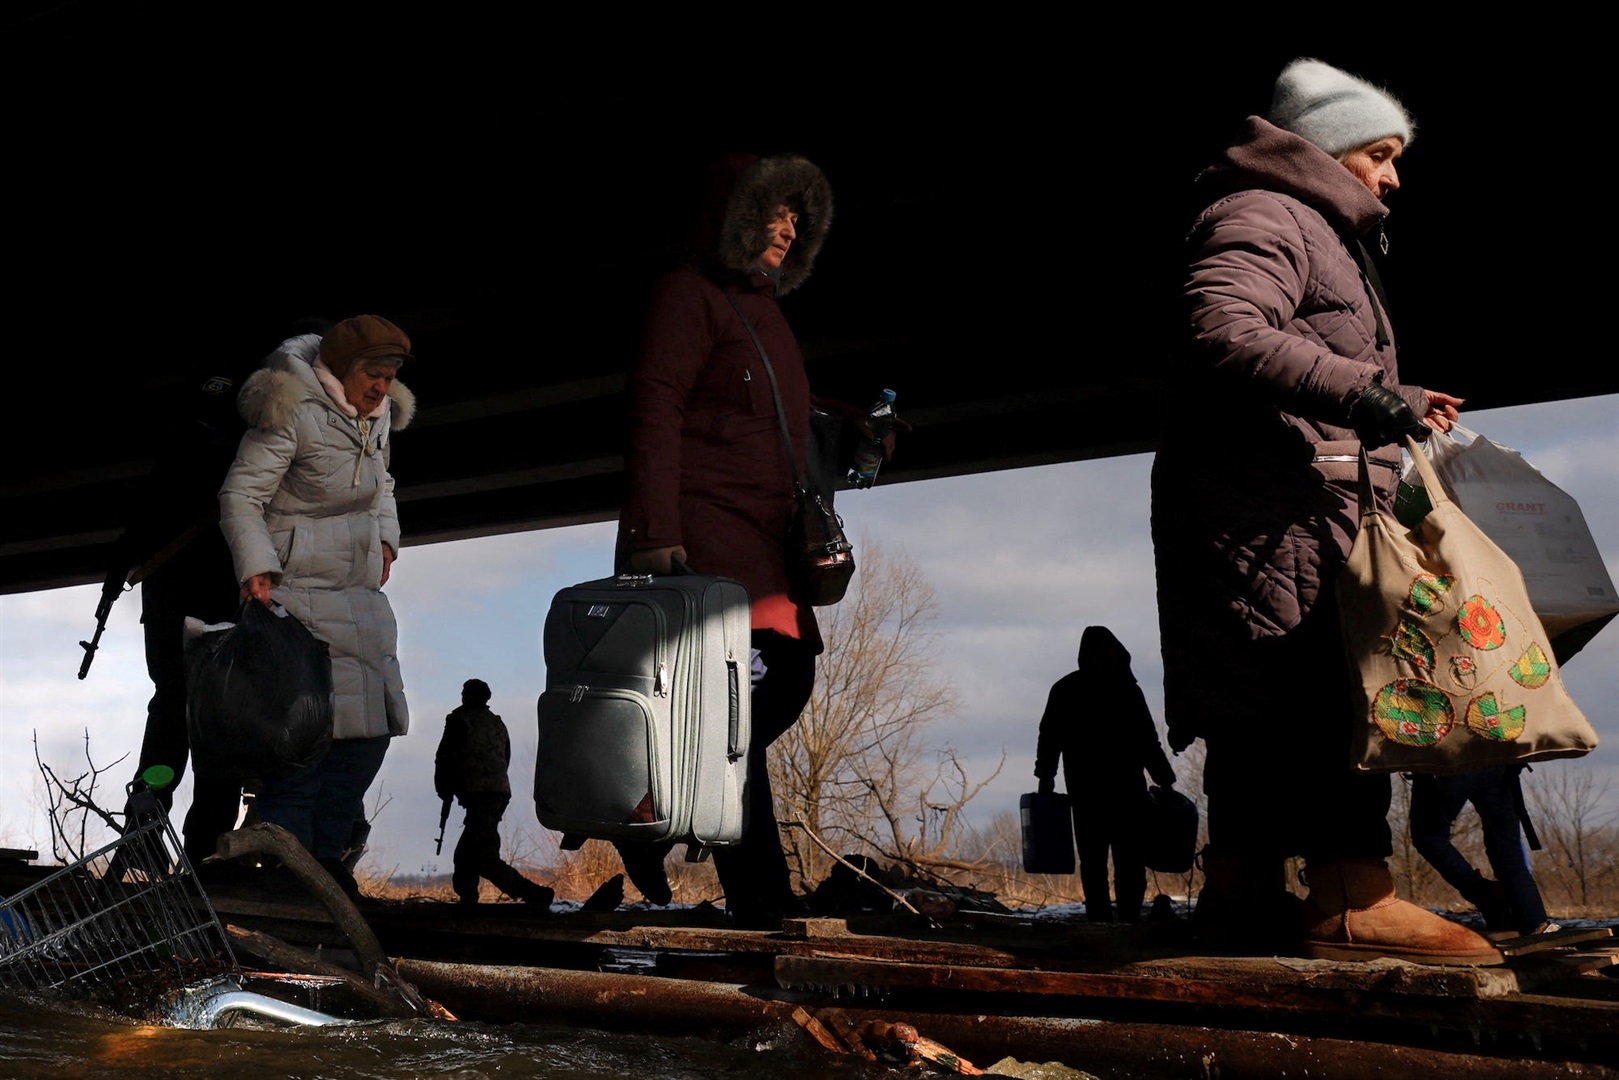 People fleeing advancing Russian forces file across wooden planks crossing Irpin River below a destroyed bridge in Ukraine, March 9, 2022. Thomas Peter/Reuters